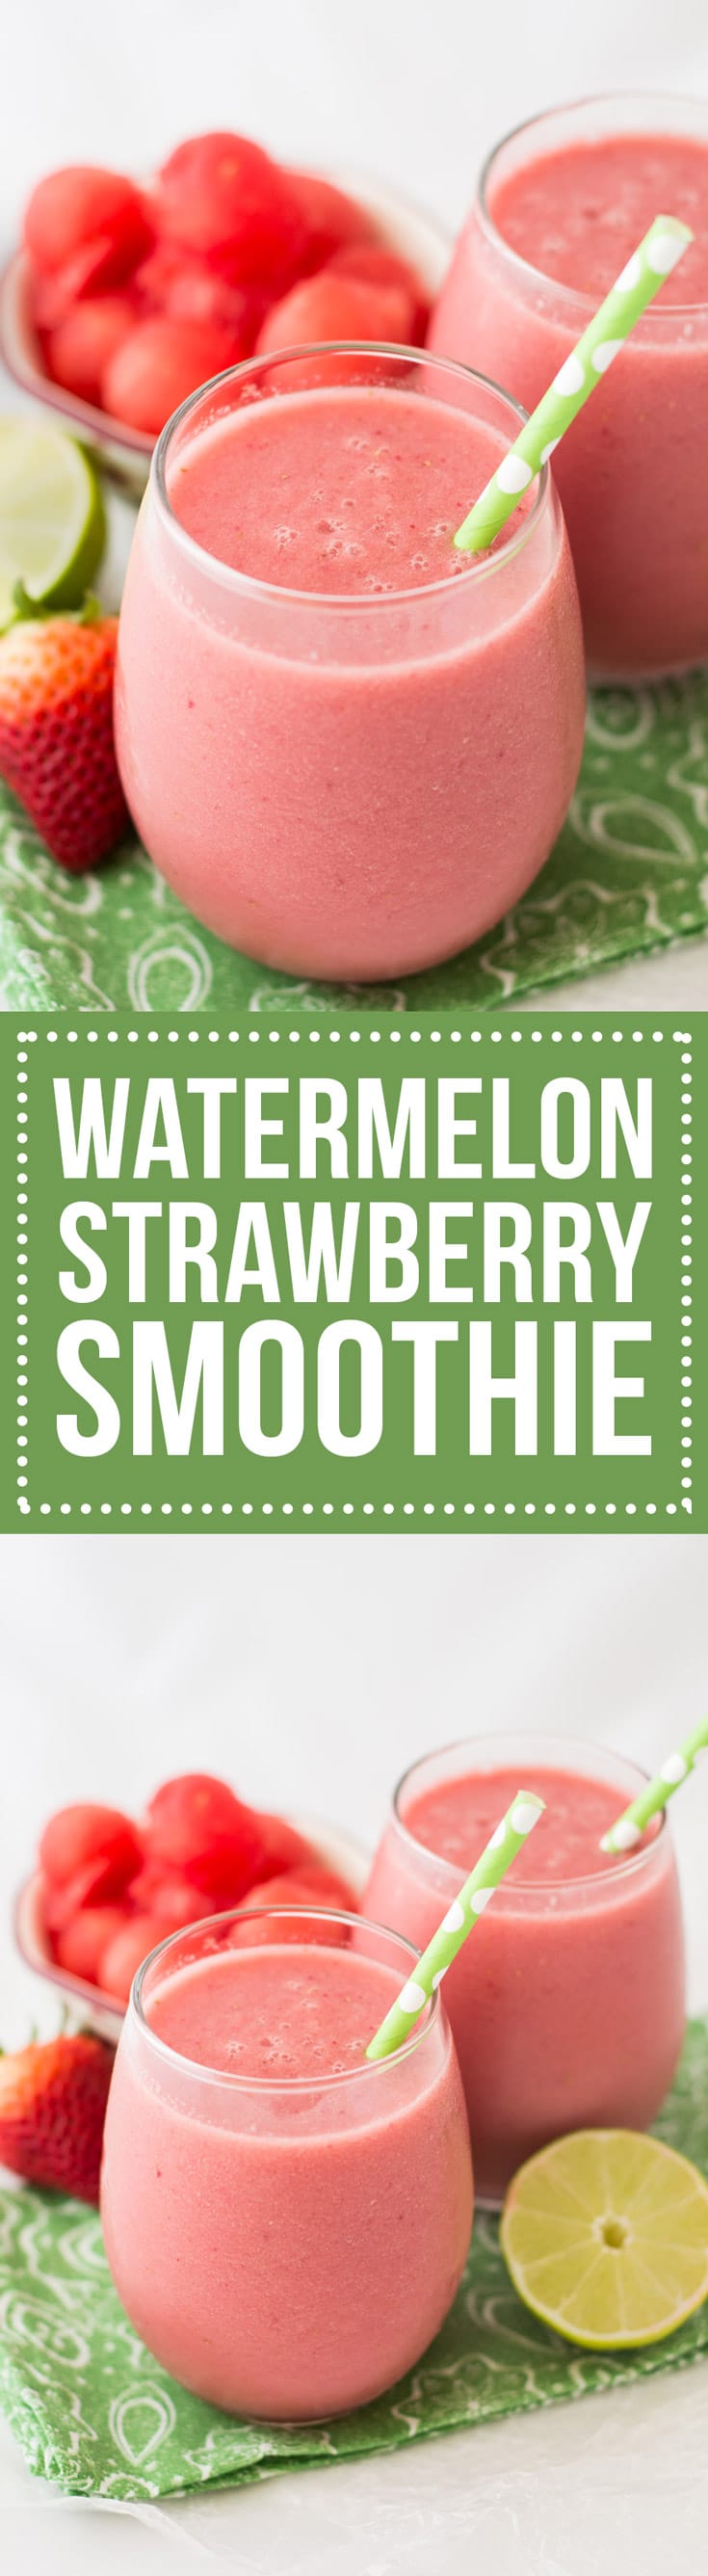 This sweet, refreshing Watermelon Strawberry Smoothie will cool you off when the summer heats up. Kid friendly, dairy free and gluten free!